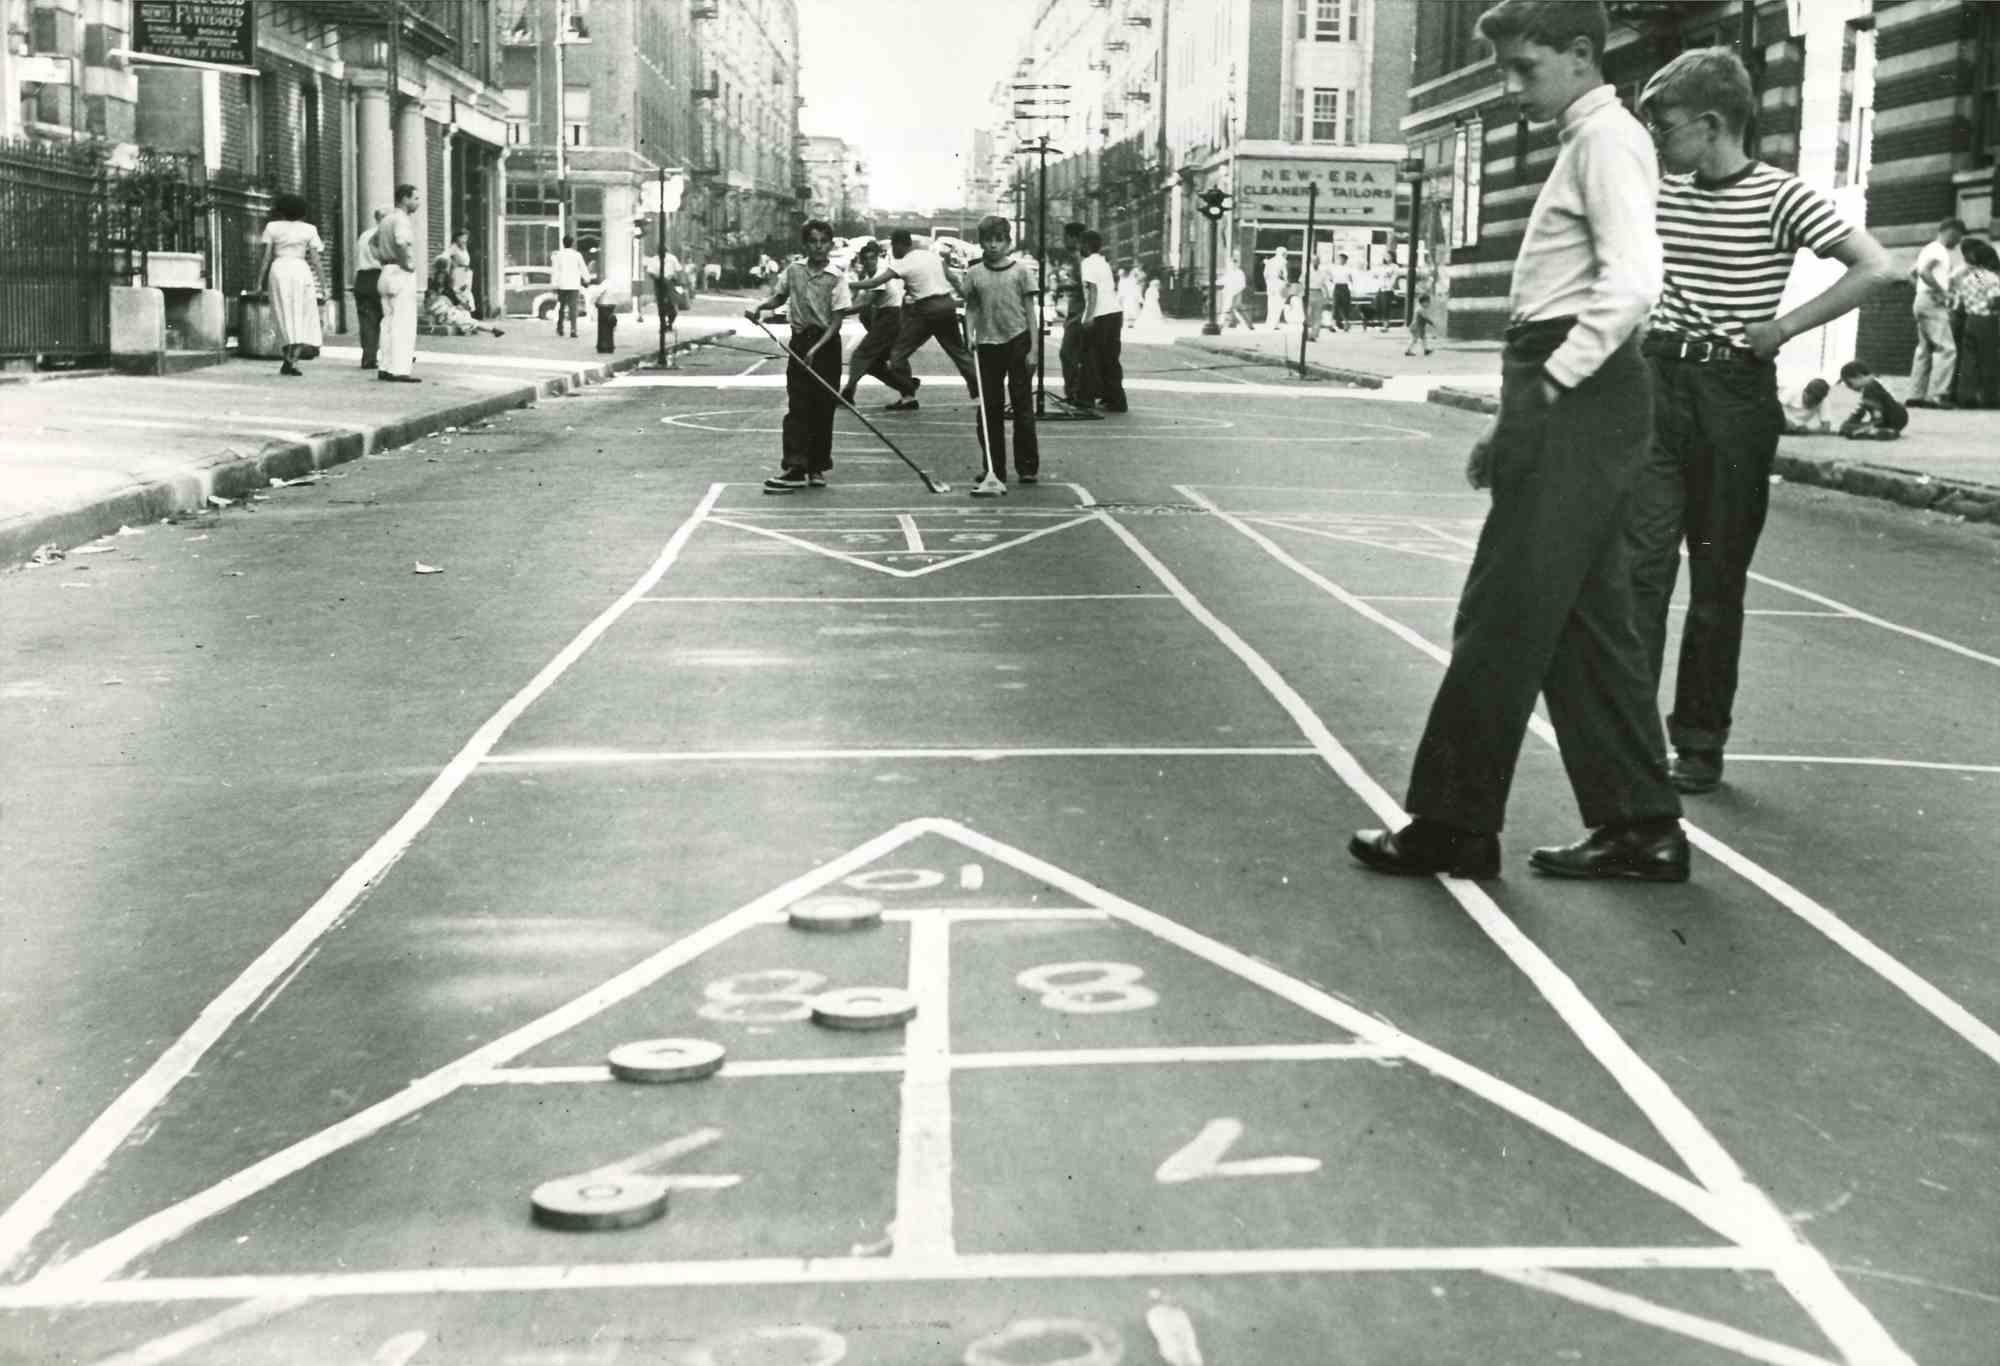 Unknown Figurative Photograph - Shuffleboard - American Vintage Photograph - Mid 20th Century